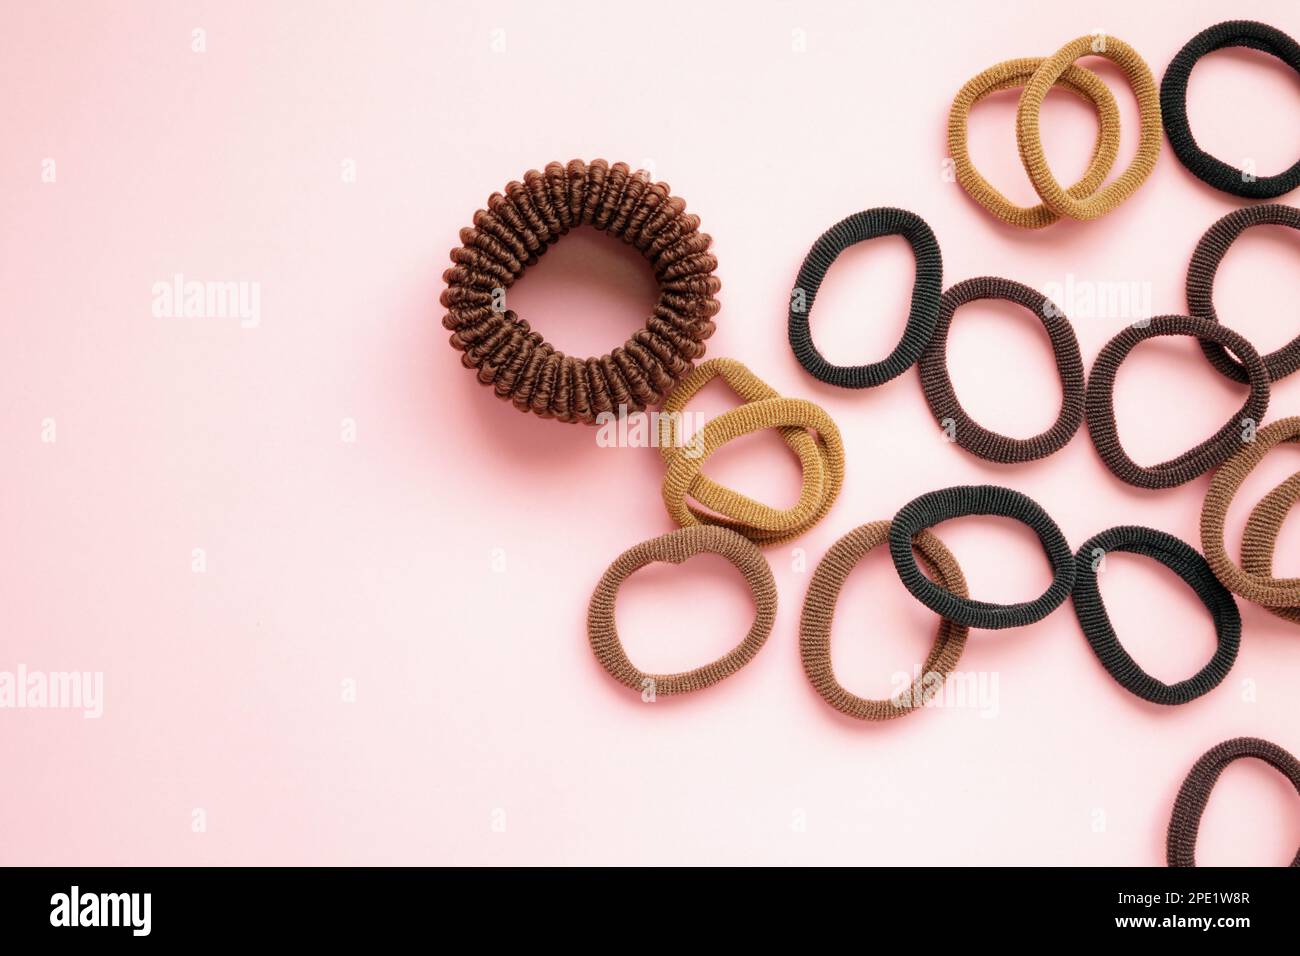 Many elastic hair ties of natural colors on a pink background with copy space. Black, brown, beige, black, thin and thick hair holders Stock Photo